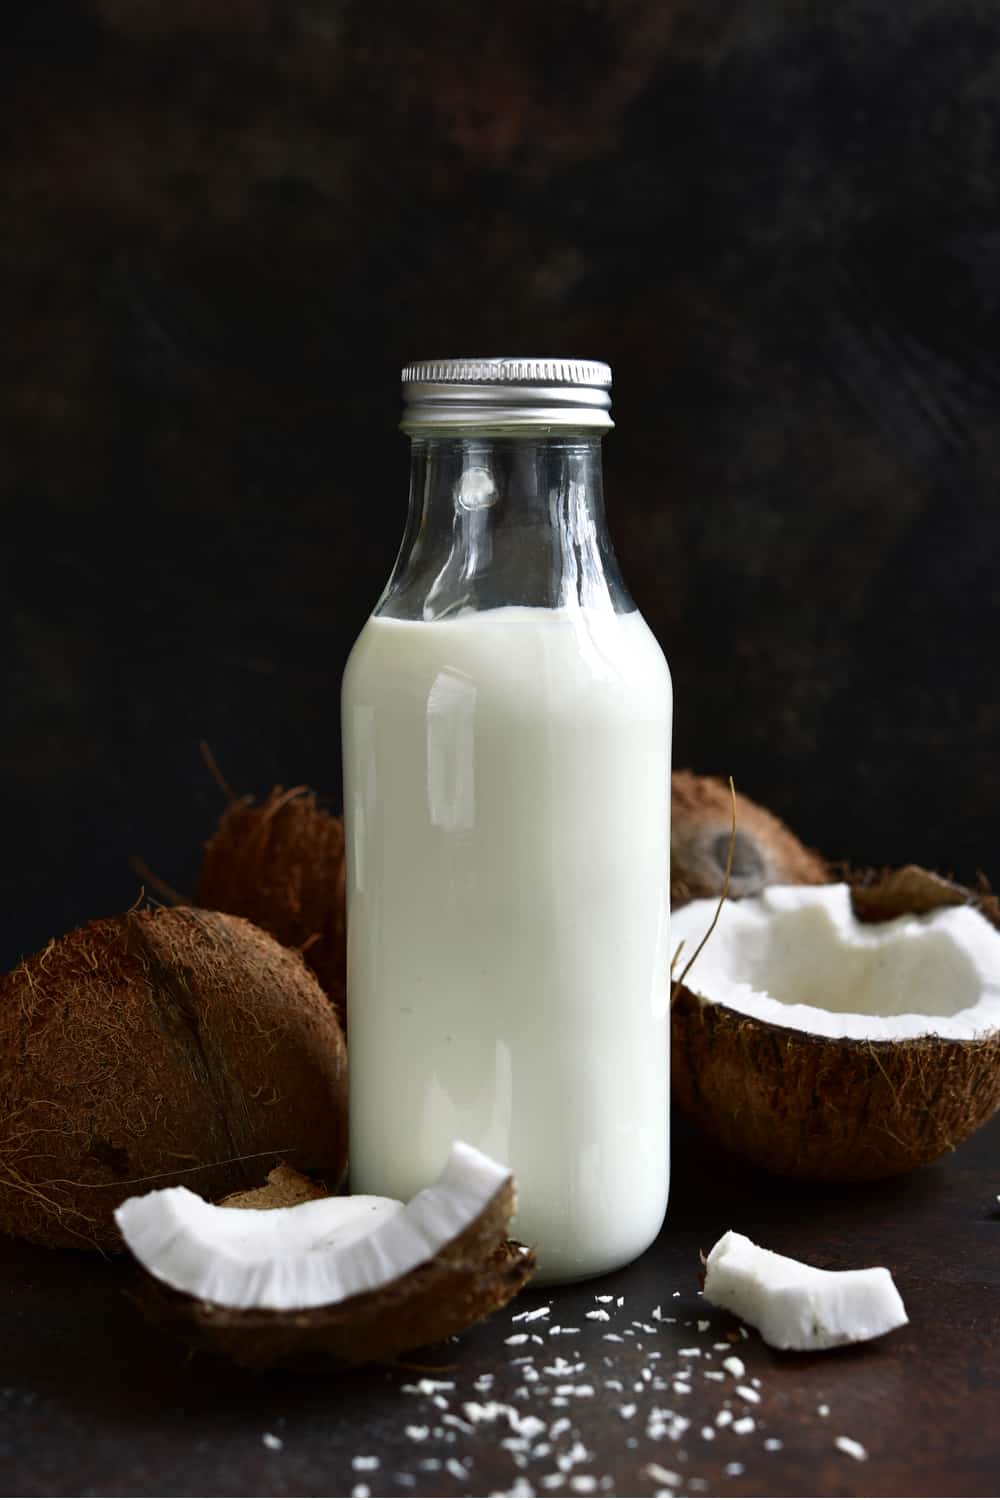 Does Coconut Milk Go Bad